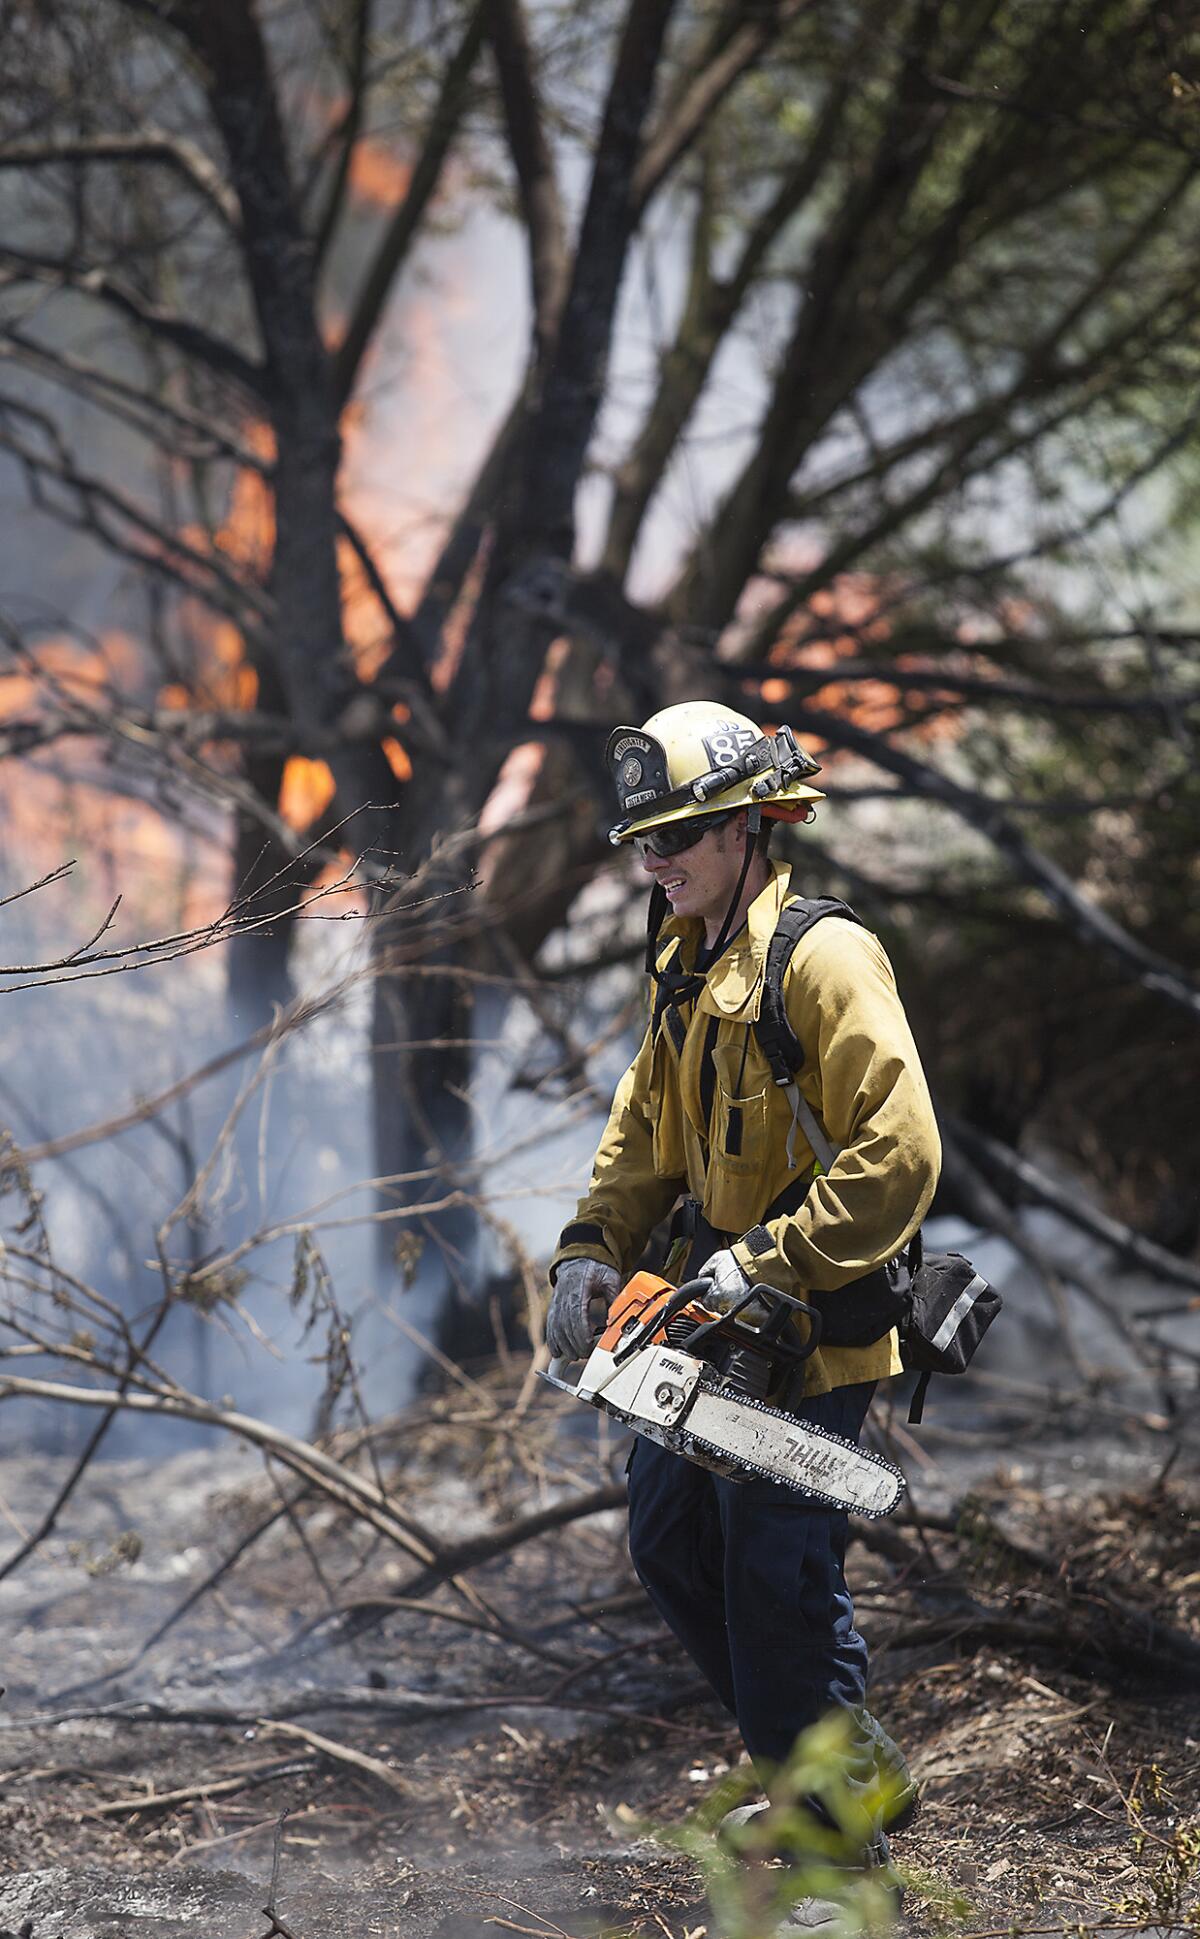 Costa Mesa Firefighter Mike Ruhl prepares to cut away brush while battling a 3-acre brush fire at Talbert Regional Park in Costa Mesa on Friday, May 9. (Scott Smeltzer - Daily Pilot)